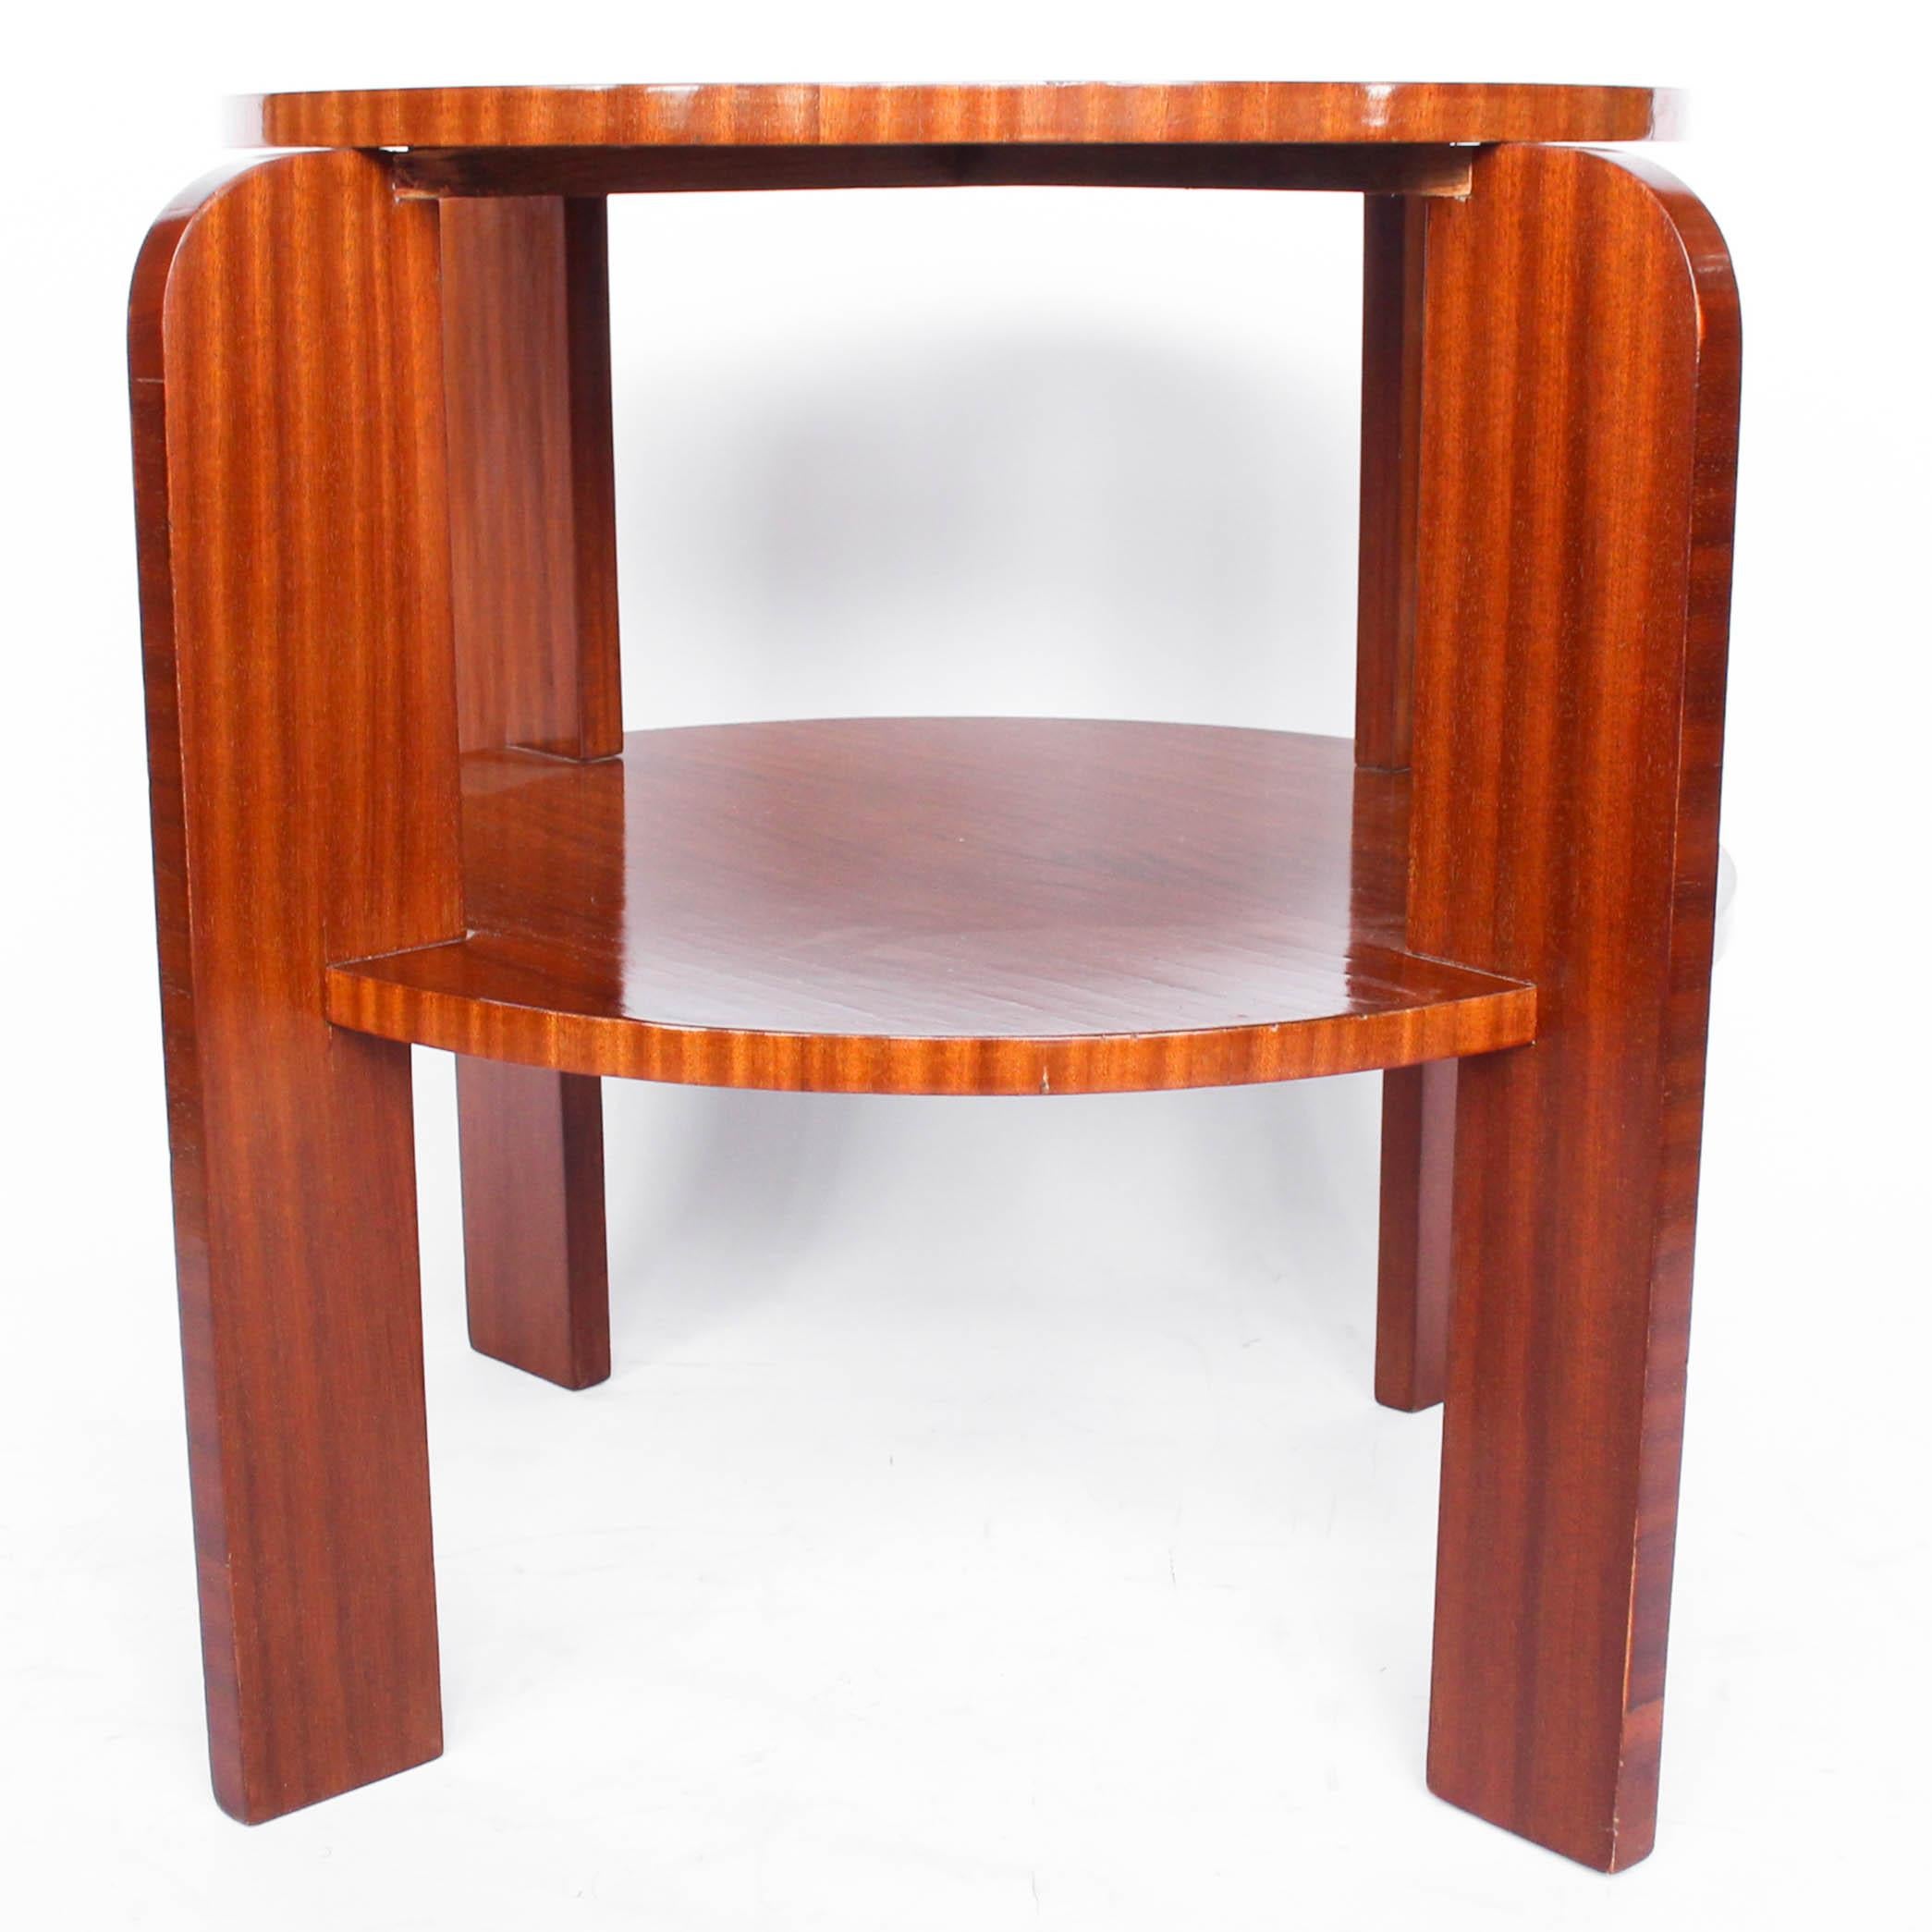 Art Deco Two-Tiered Solid Pine Side Table with Striped Mahogany, French, 1930s In Good Condition For Sale In Forest Row, East Sussex